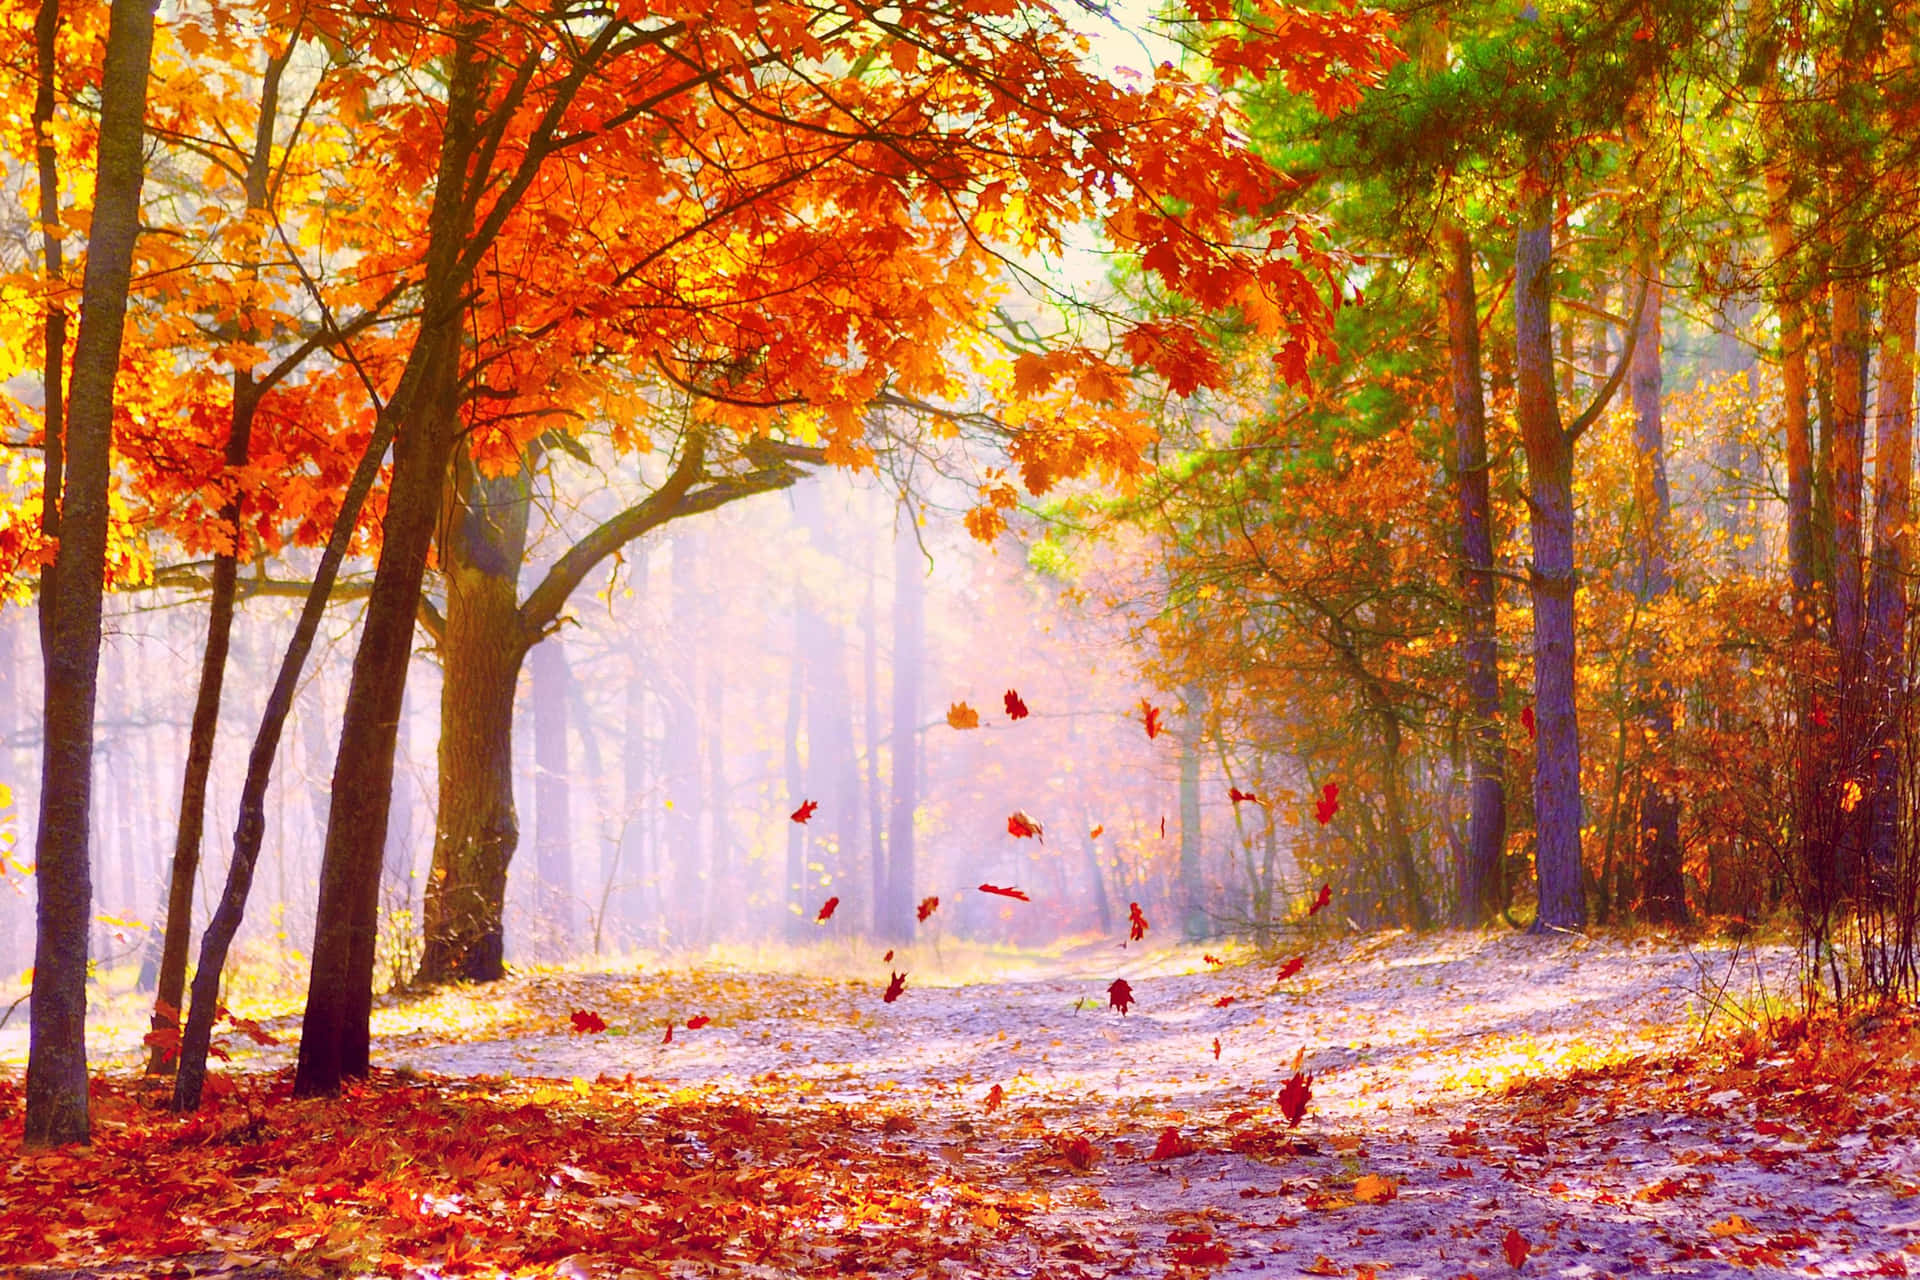 A Rustic Autumn Scene with Fallen Leaves Wallpaper